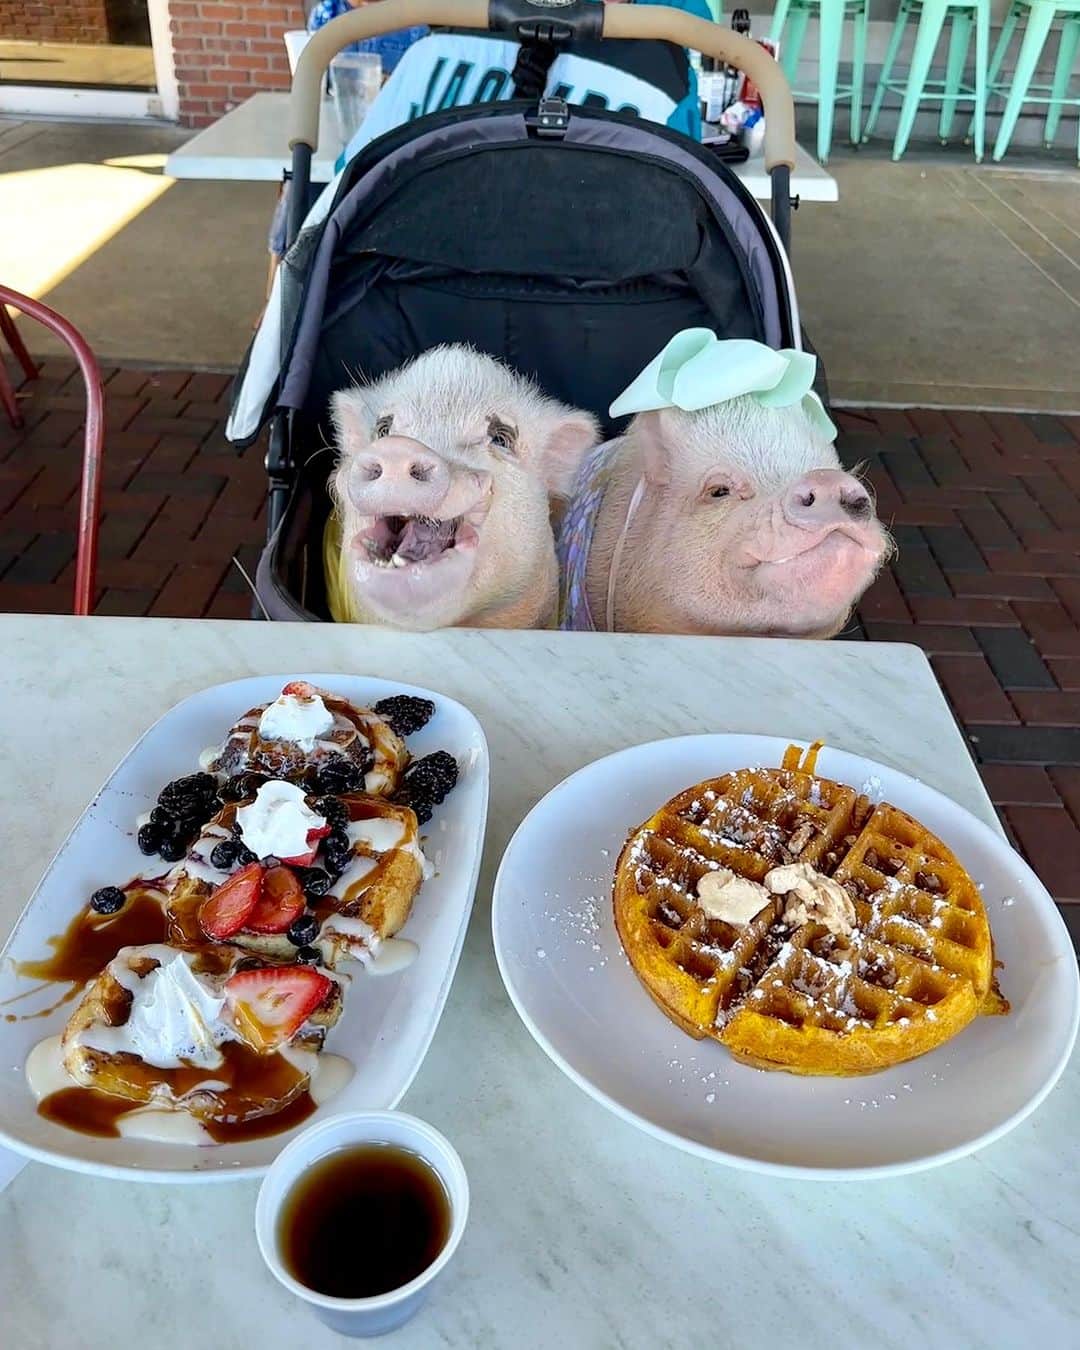 Priscilla and Poppletonのインスタグラム：「It doesn’t get much better than cinnamon roll french toast and pumpkin waffles! ThOINK for coming to see us and treating us to a PIGTASTIC brunch Miss Jordana. We love you a waffle-y lot!🐷🧇 #brunchvibes #poseyandpop #prissyandpop」